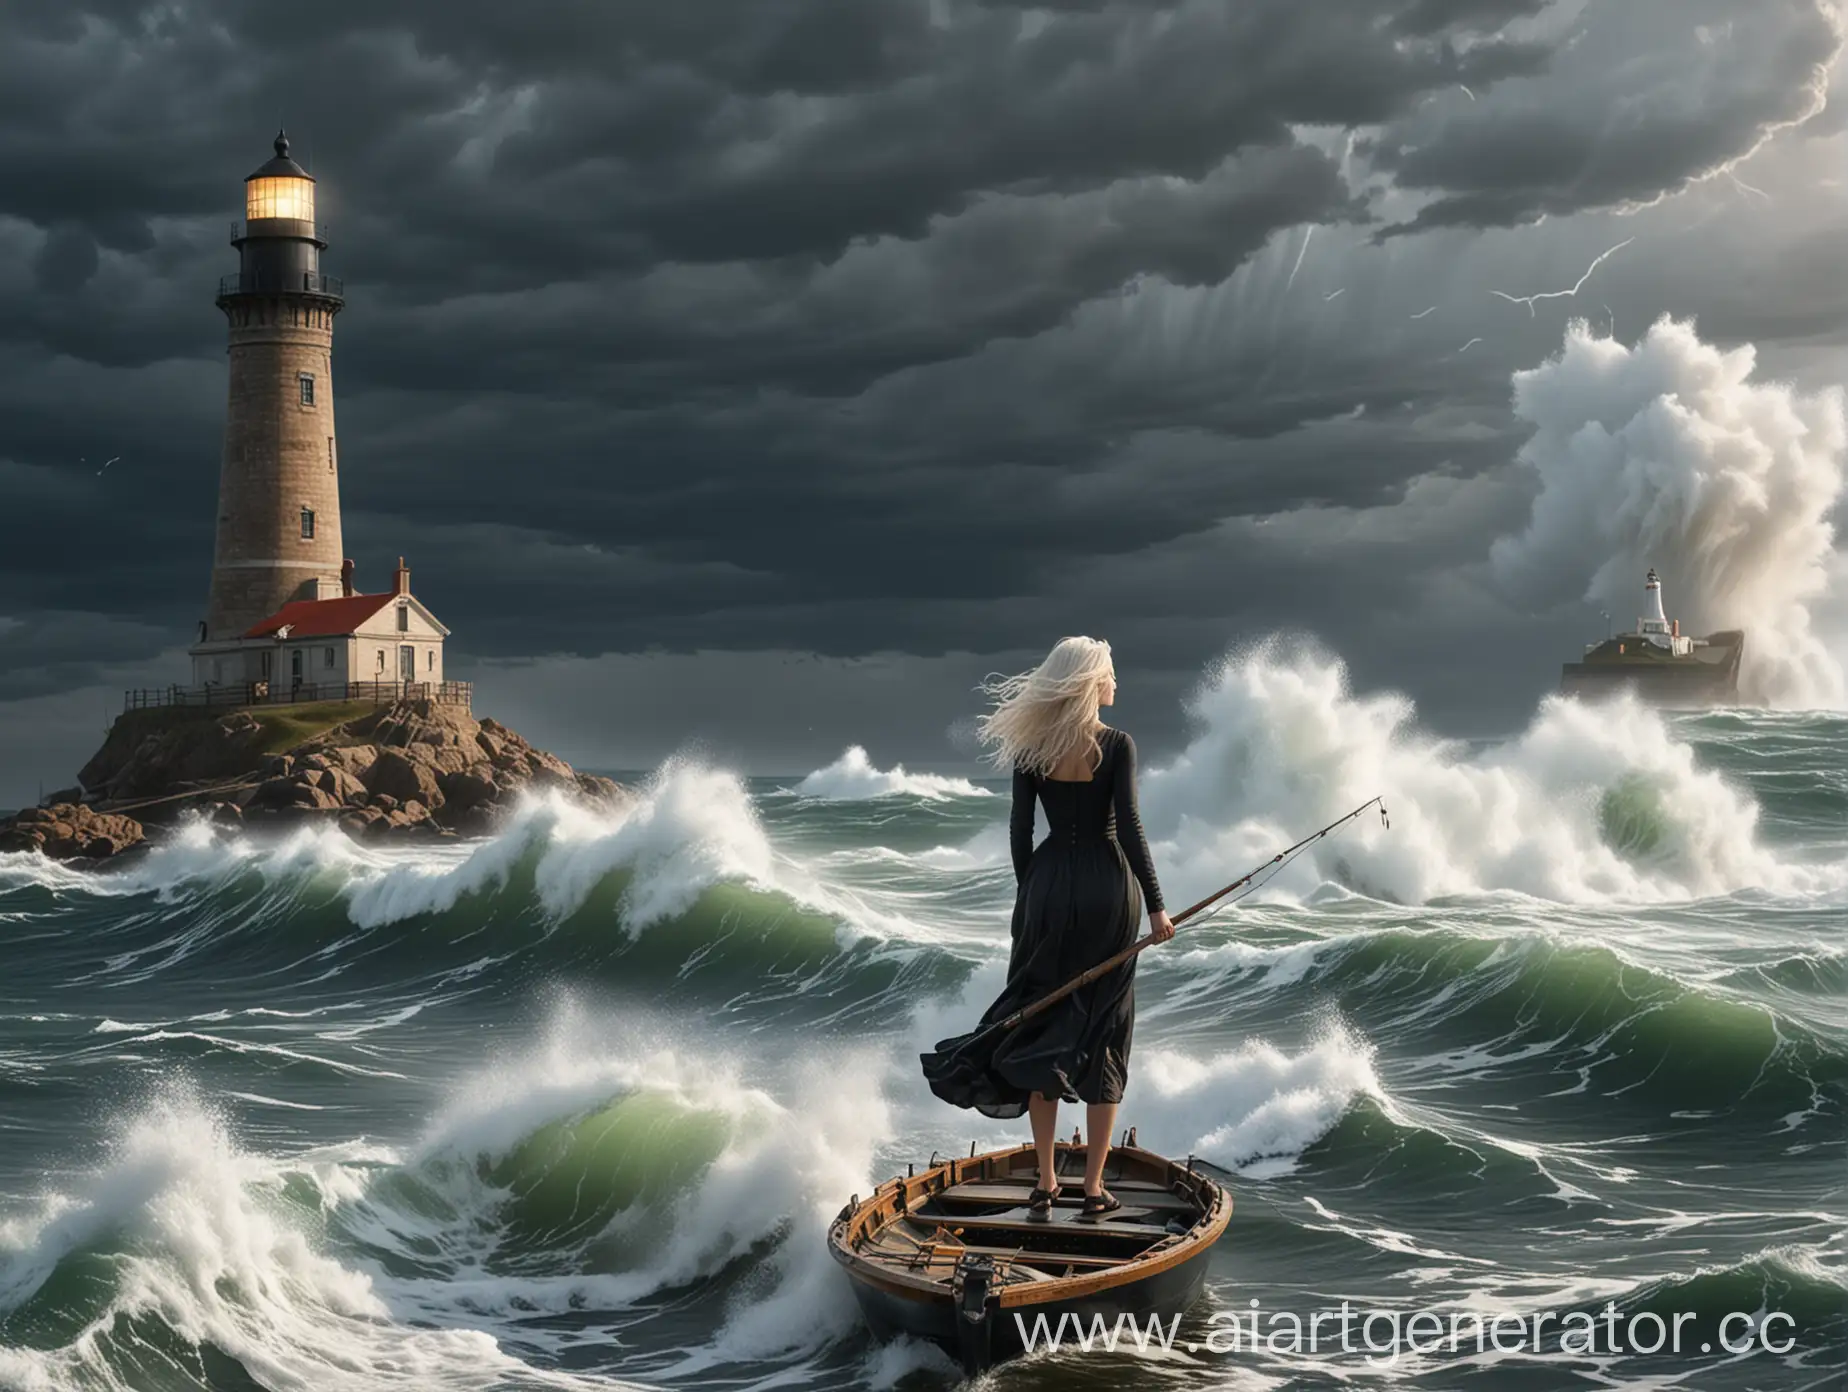 Girl-Fishing-from-Boat-near-Lighthouse-in-Stormy-Seas